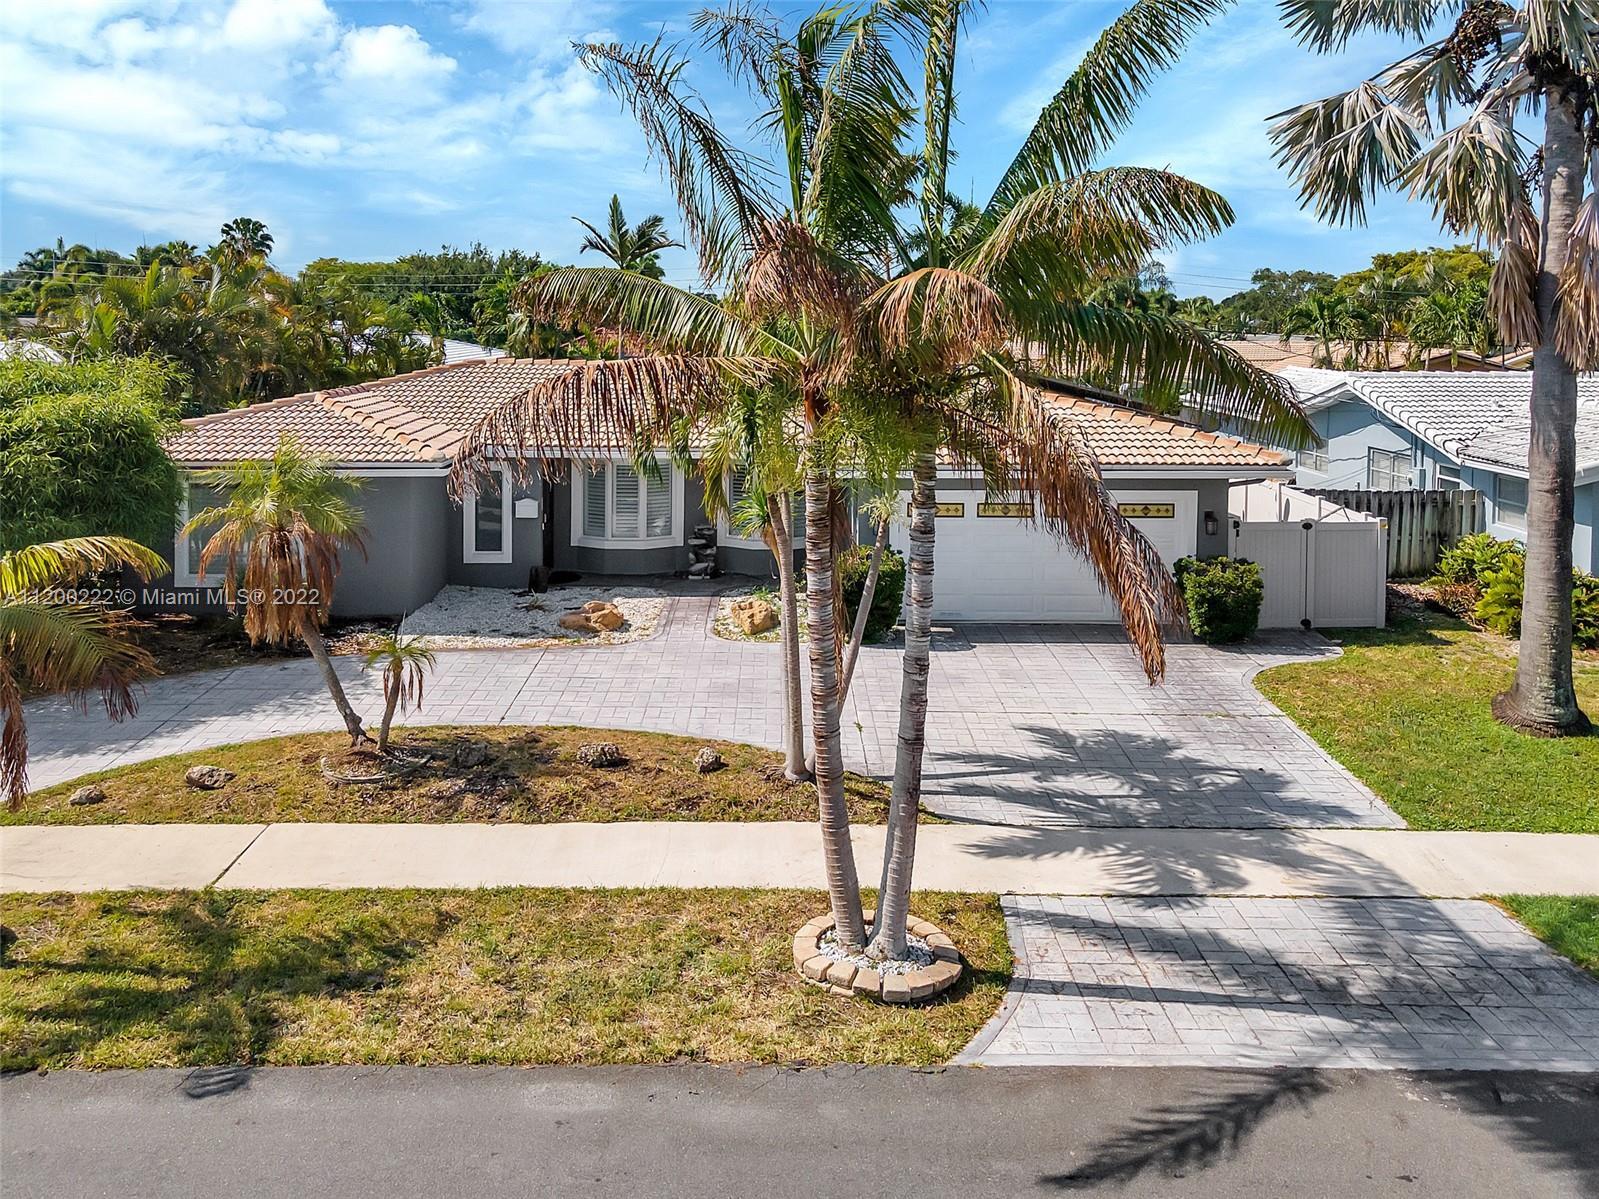 Contemporary estate located in the heart of one of the most coveted neighborhoods in Fort Lauderdale